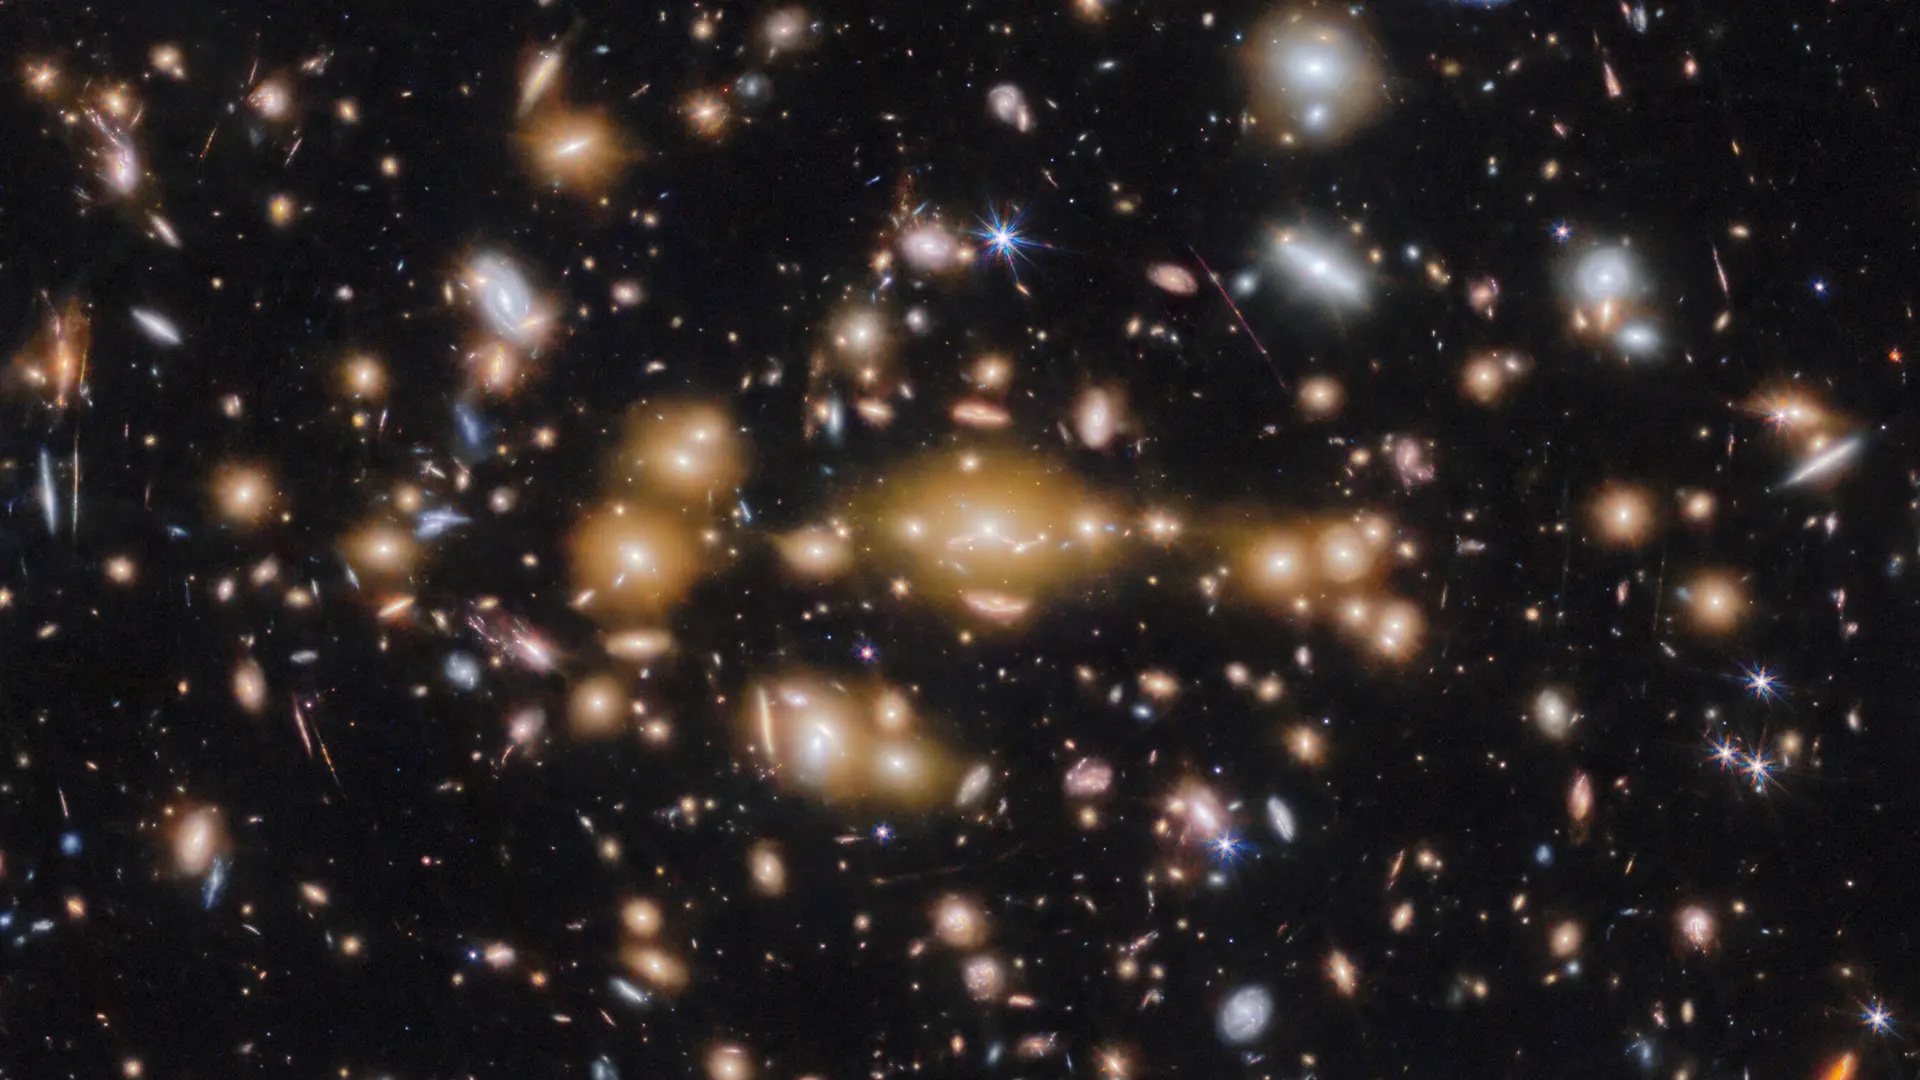 A field of many galaxies pictured by the James Webb Space Telescope. Images courtesy of ESA/Webb, NASA & CSA, L. Bradley (STScI), A. Adamo (Stockholm University) and the Cosmic Spring collaboration